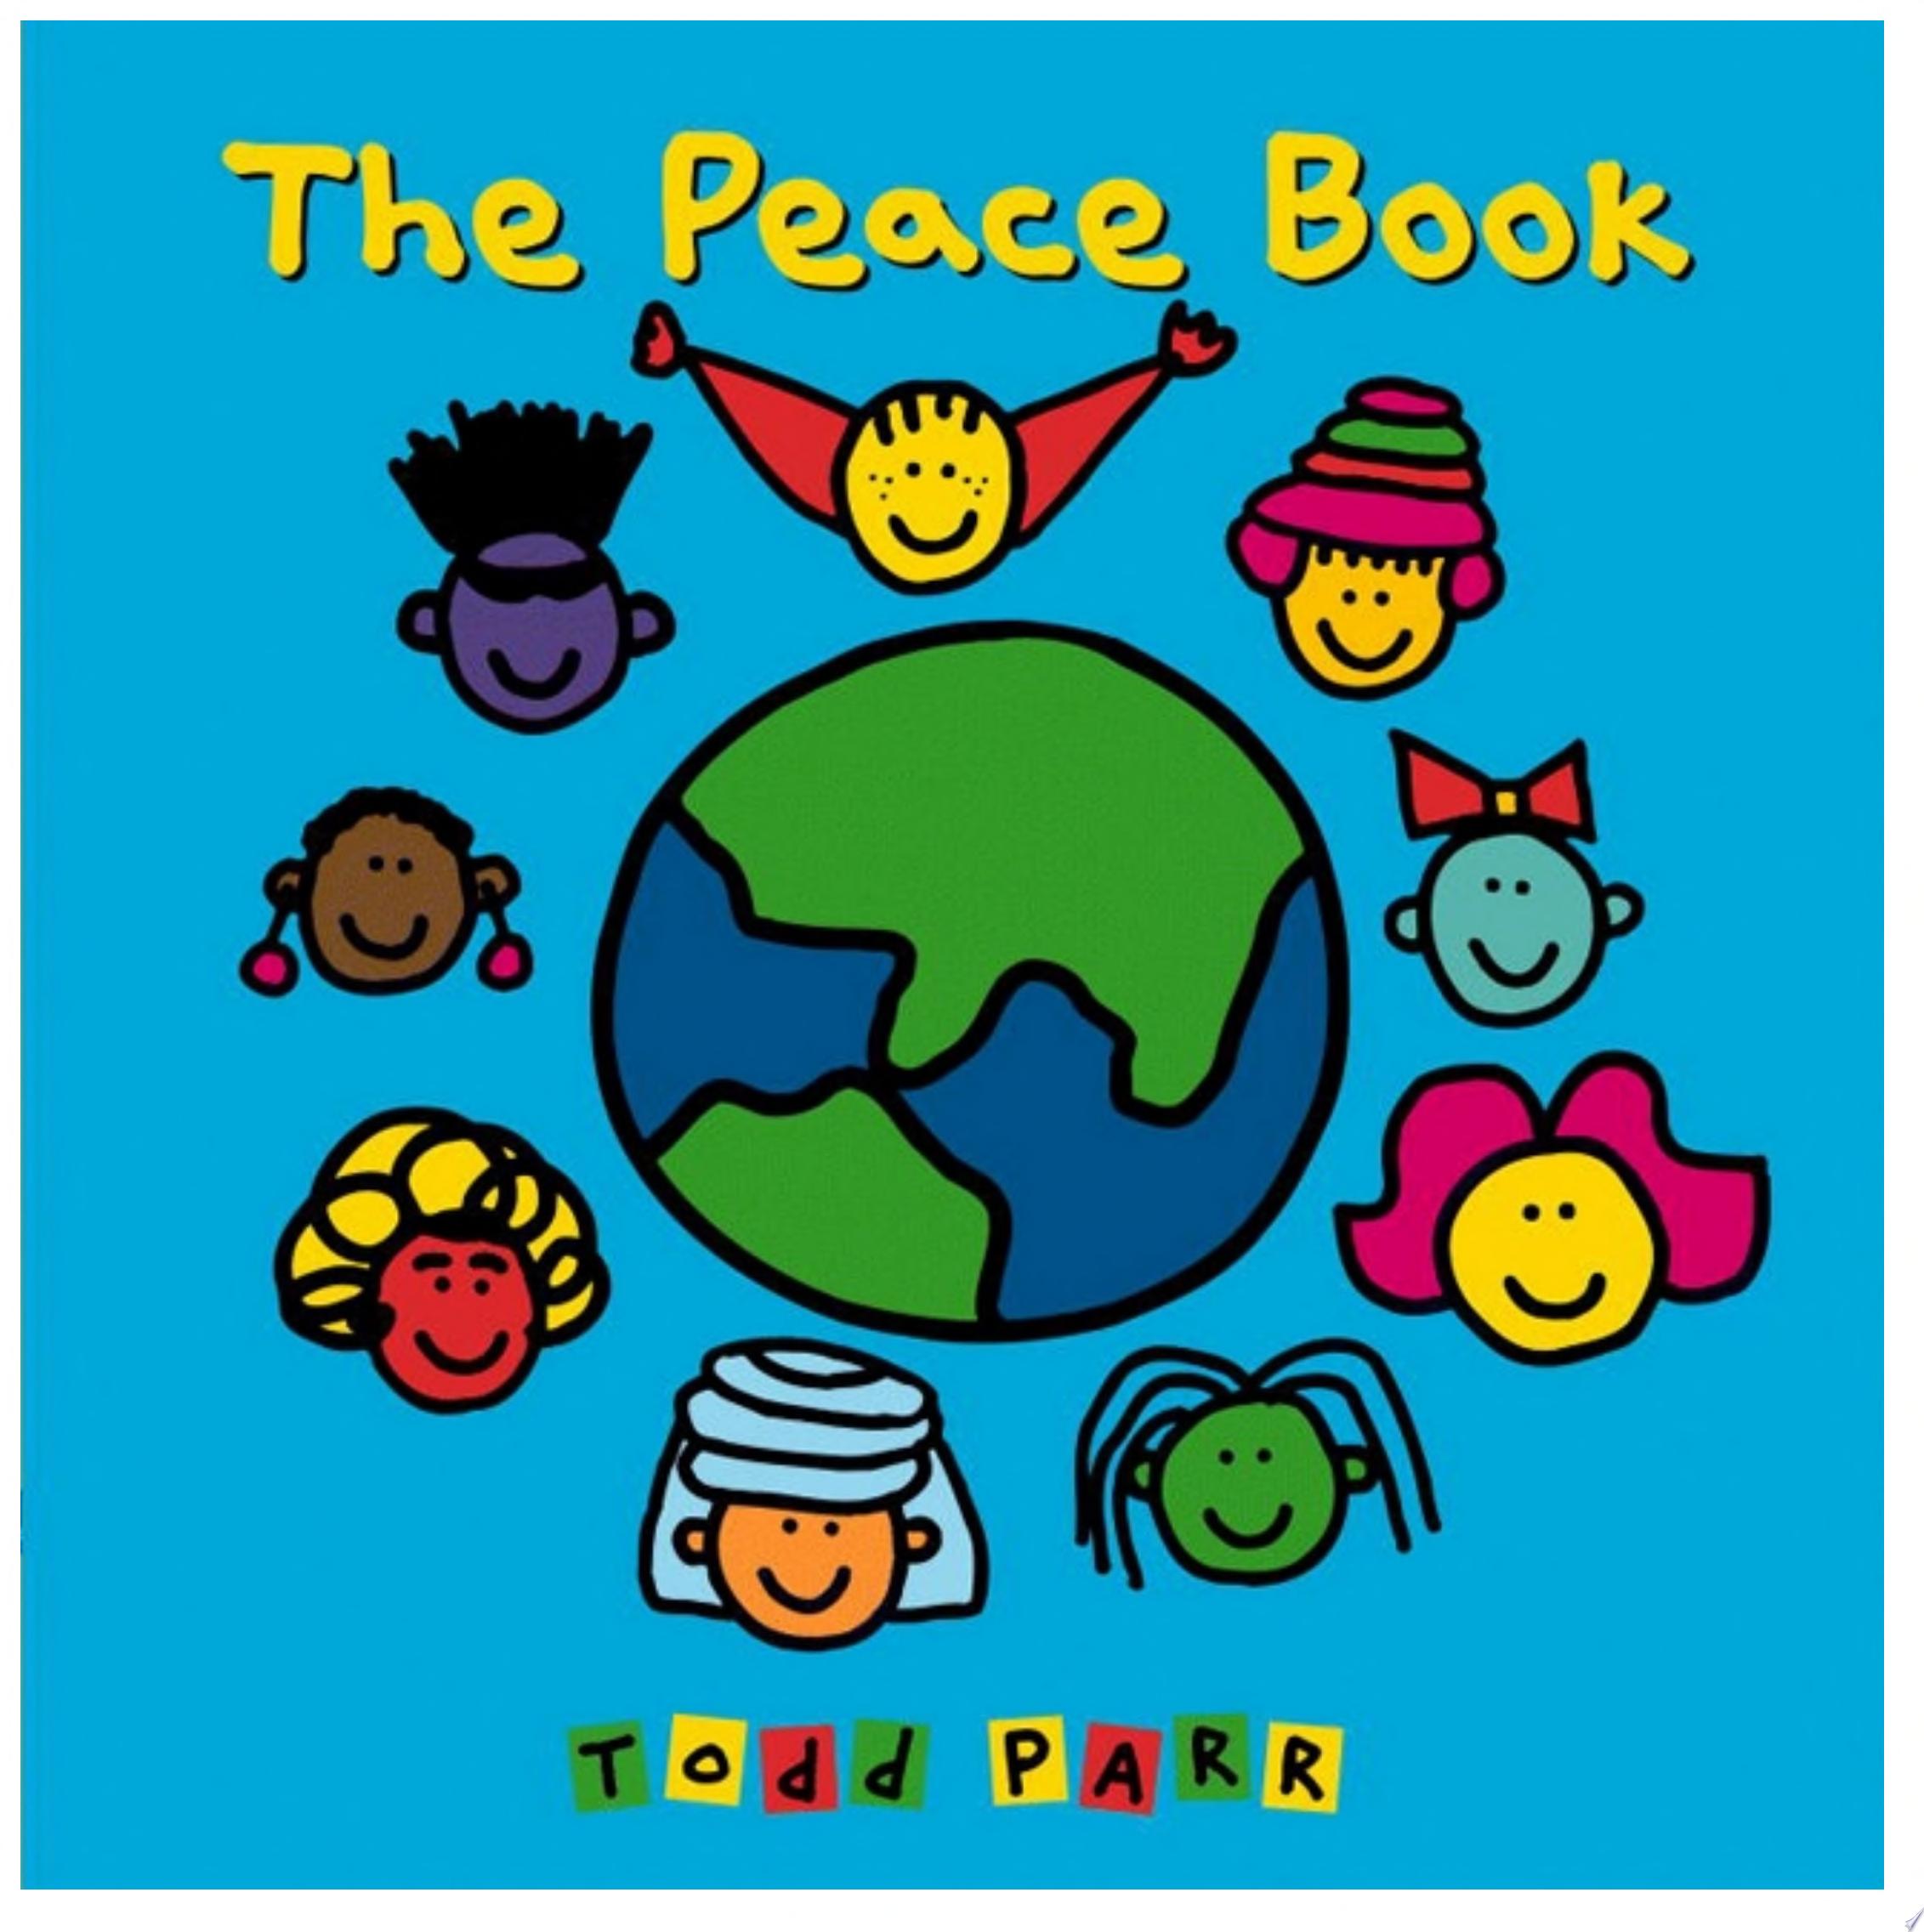 Image for "The Peace Book"